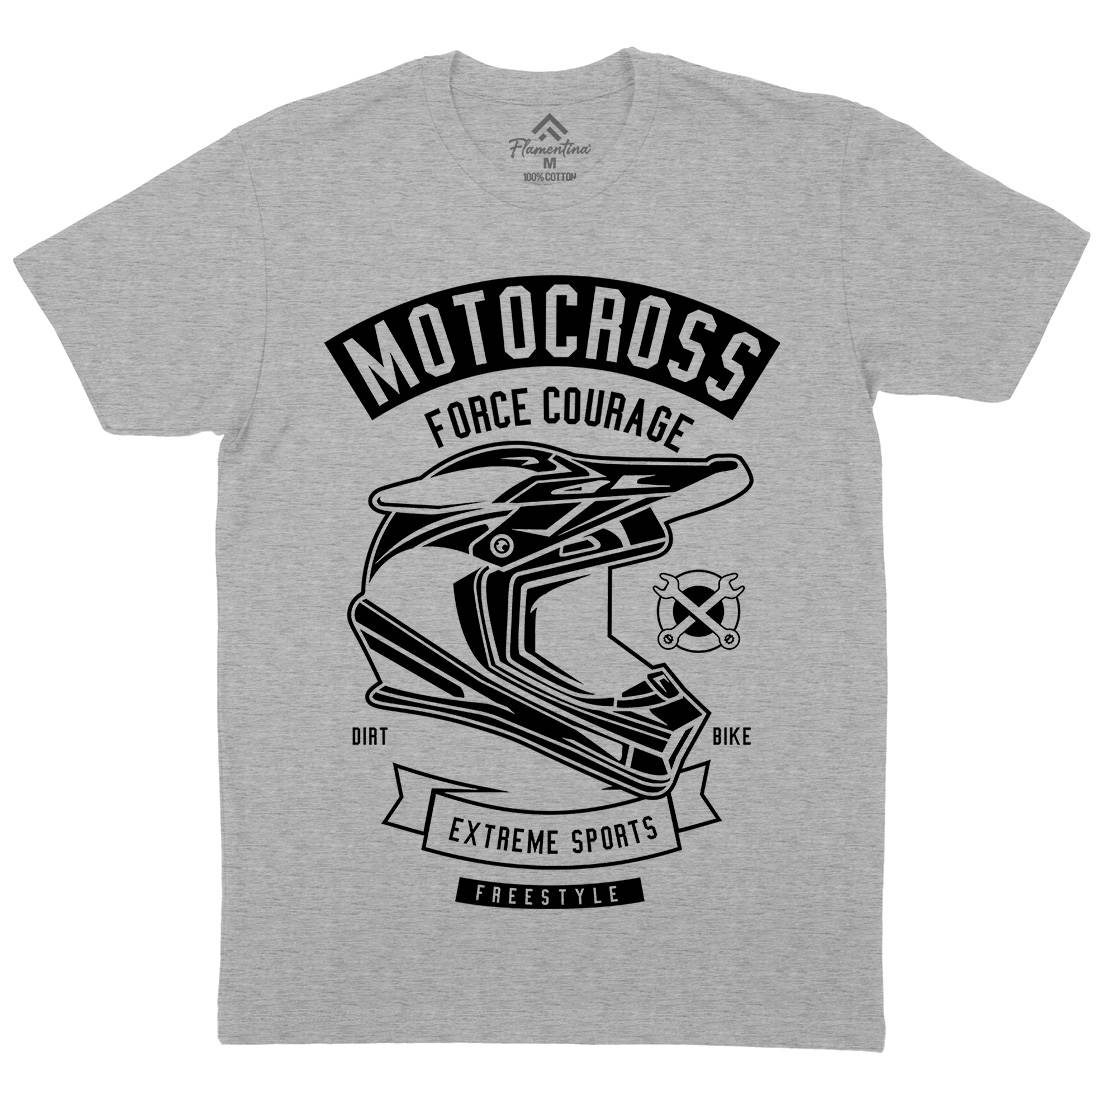 Motocross Force Courage Mens Crew Neck T-Shirt Motorcycles B576